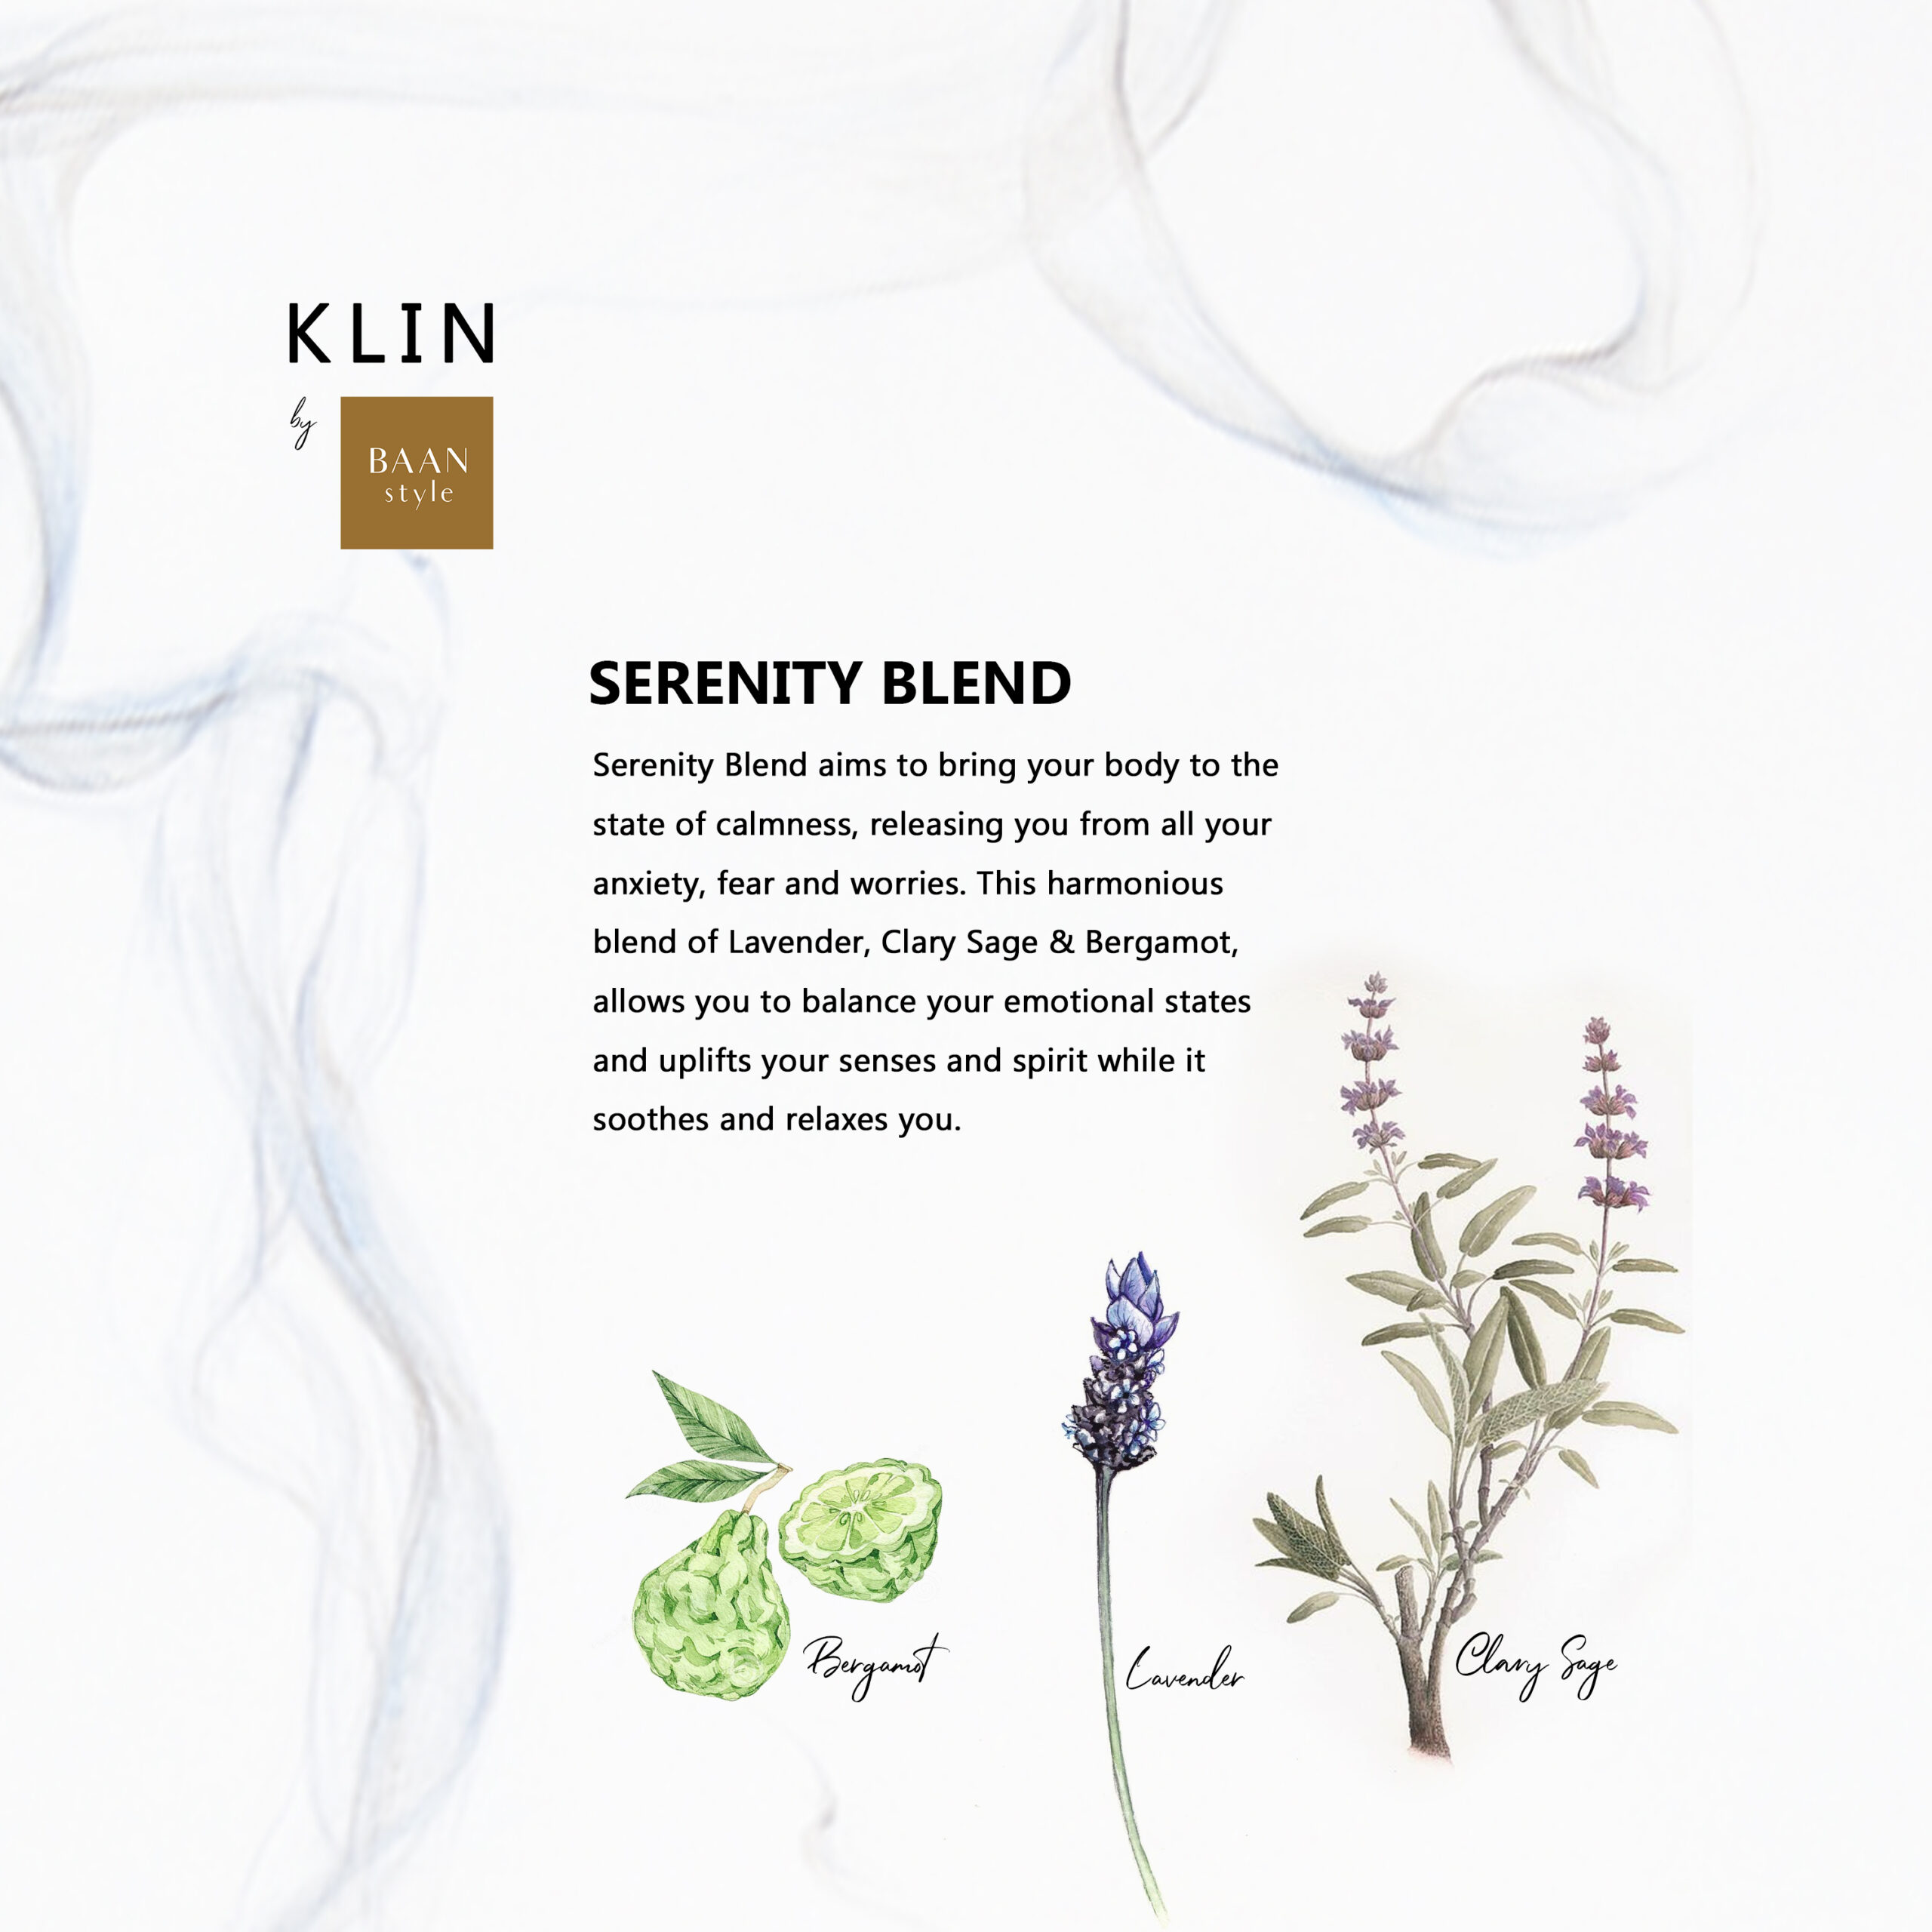 KLIN by Baan Style - Serenity Blend - Poster